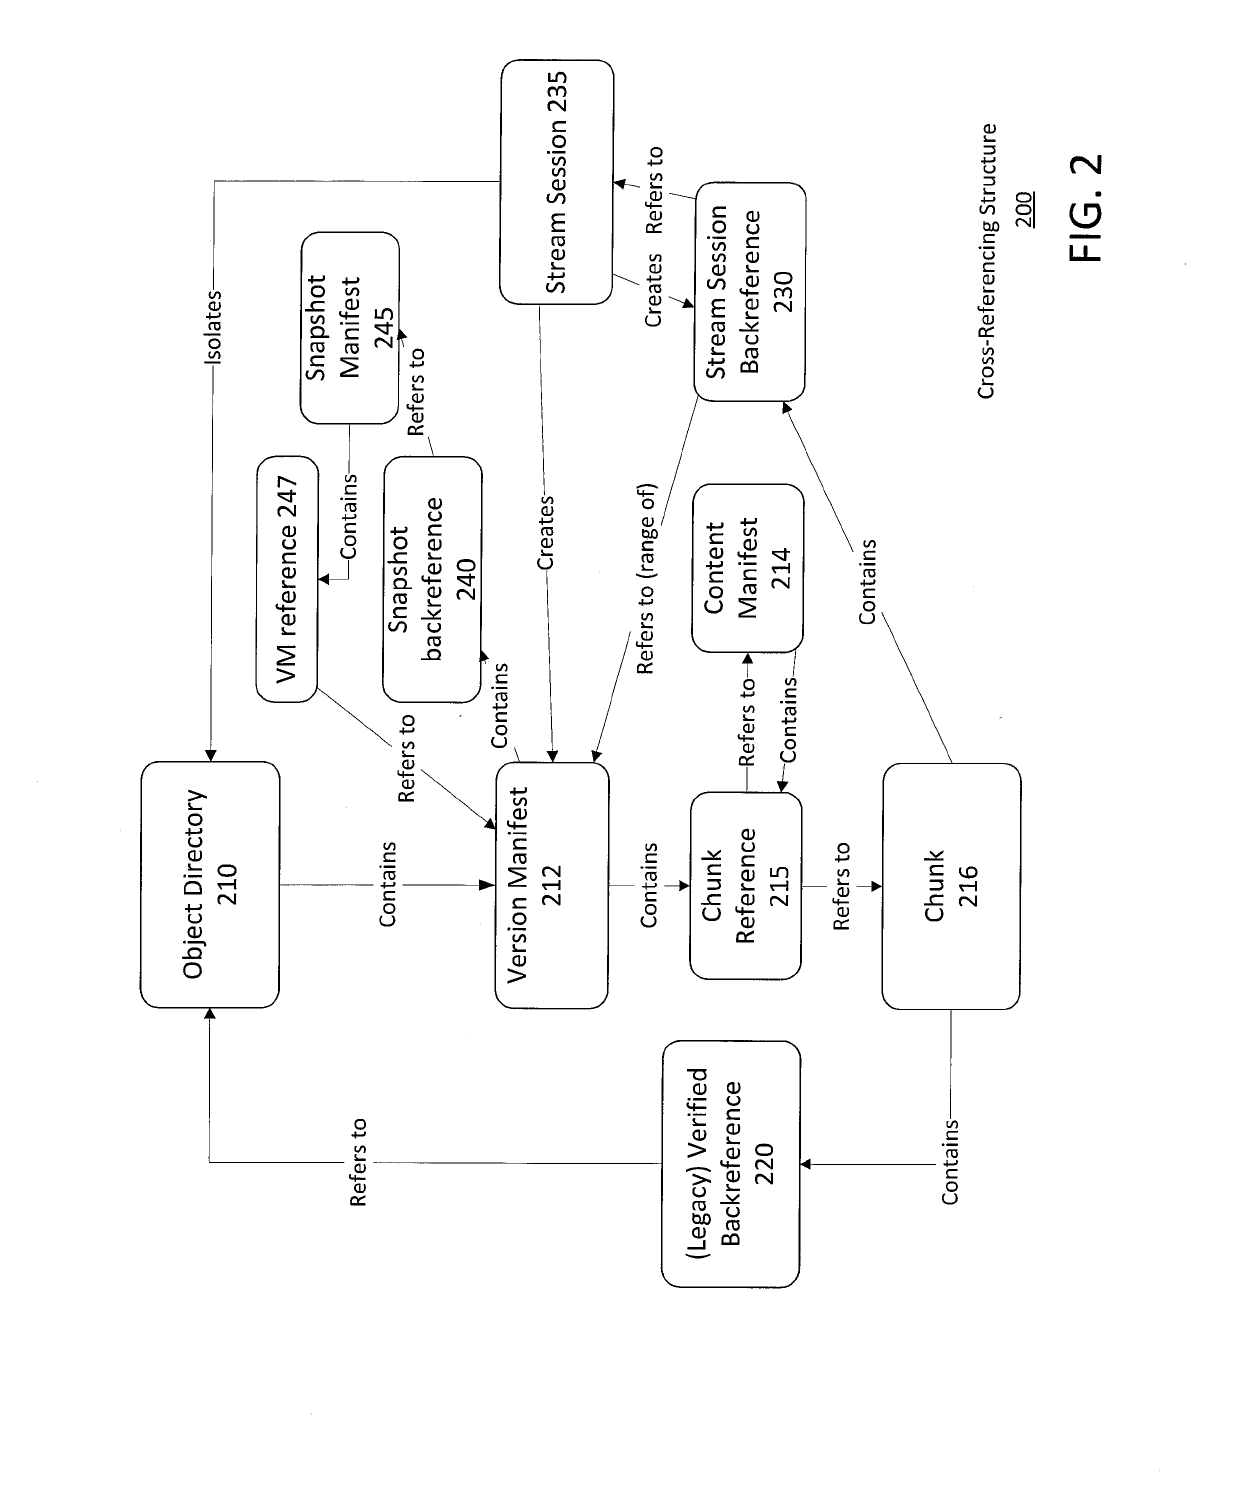 Chunk retention in a distributed object storage system using stream sessions and stream session backreferences